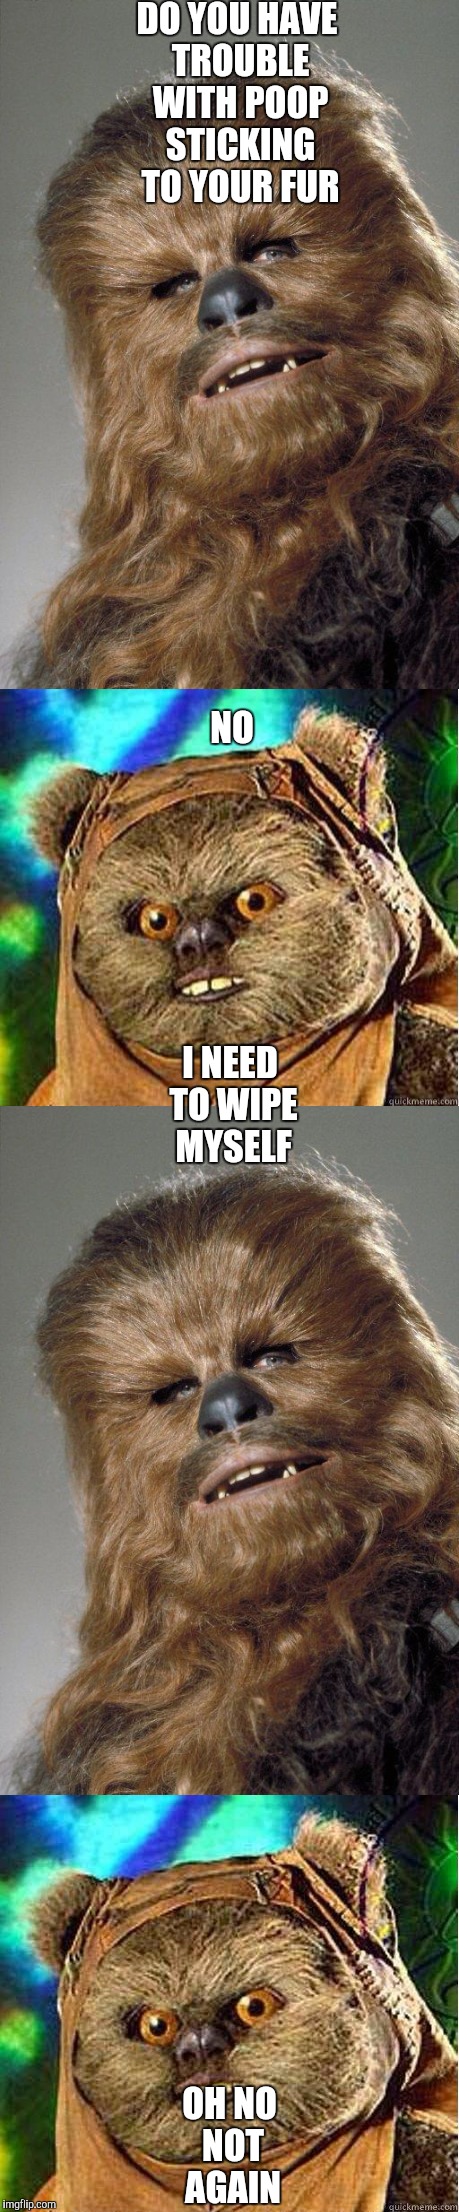 Wookie on Endor | DO YOU HAVE TROUBLE WITH POOP STICKING TO YOUR FUR; NO; I NEED TO WIPE MYSELF; OH NO NOT AGAIN | image tagged in starwars,funny memes,wookies,demented ewok | made w/ Imgflip meme maker